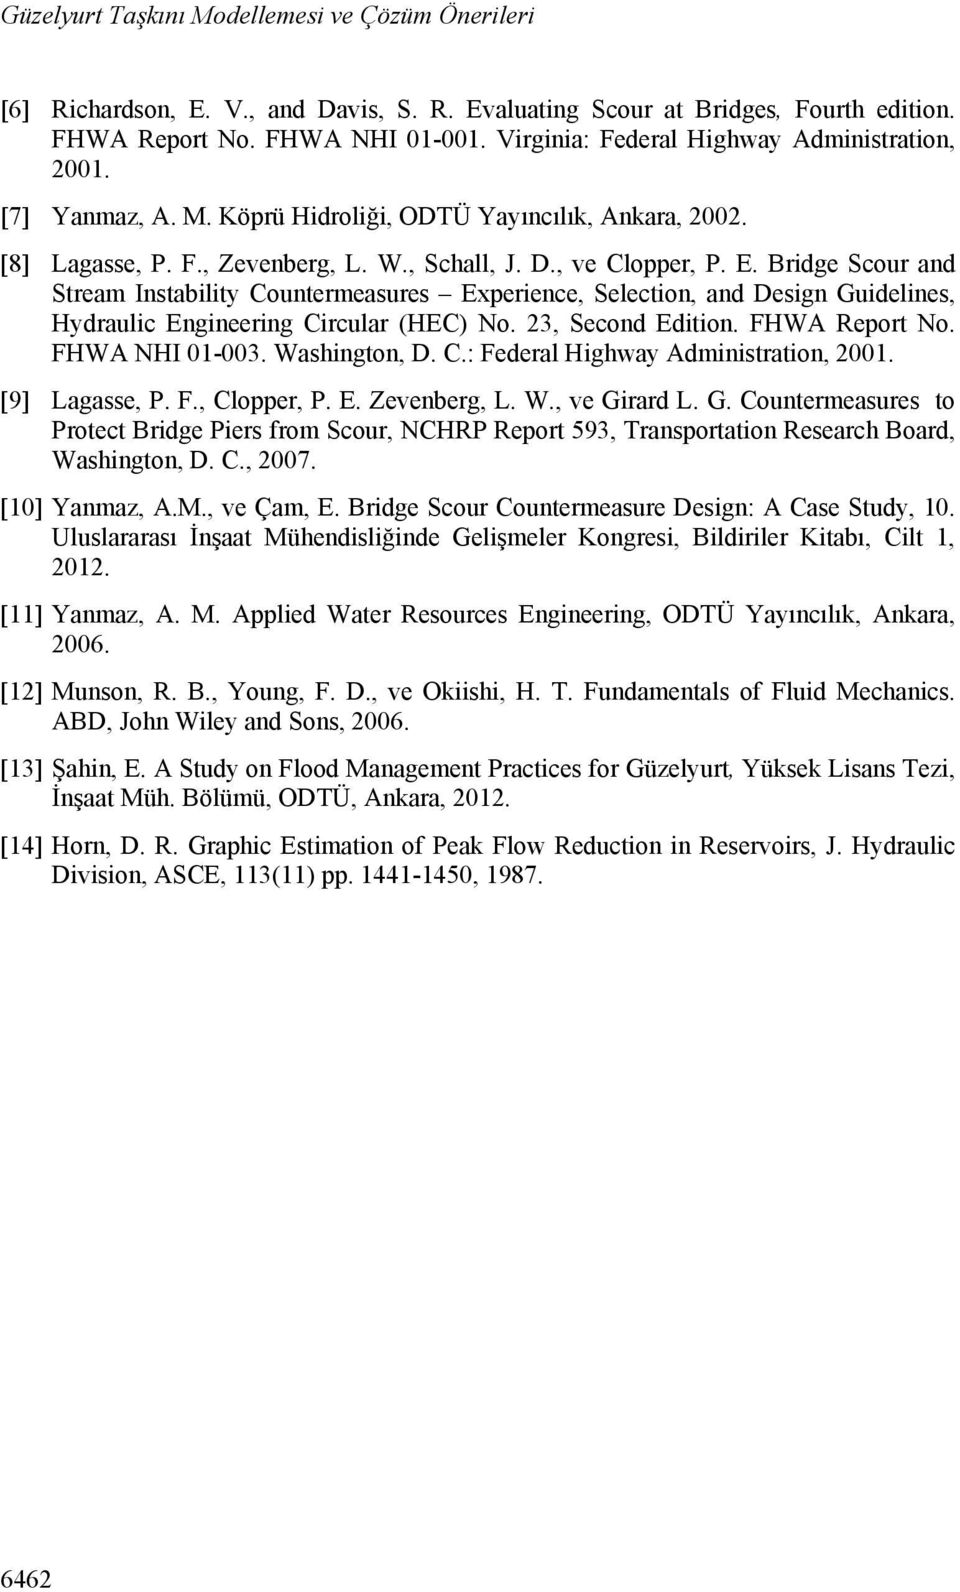 Bridge Scour and Stream Instability Countermeasures Experience, Selection, and Design Guidelines, Hydraulic Engineering Circular (HEC) No. 23, Second Edition. FHWA Report No. FHWA NHI 01-003.